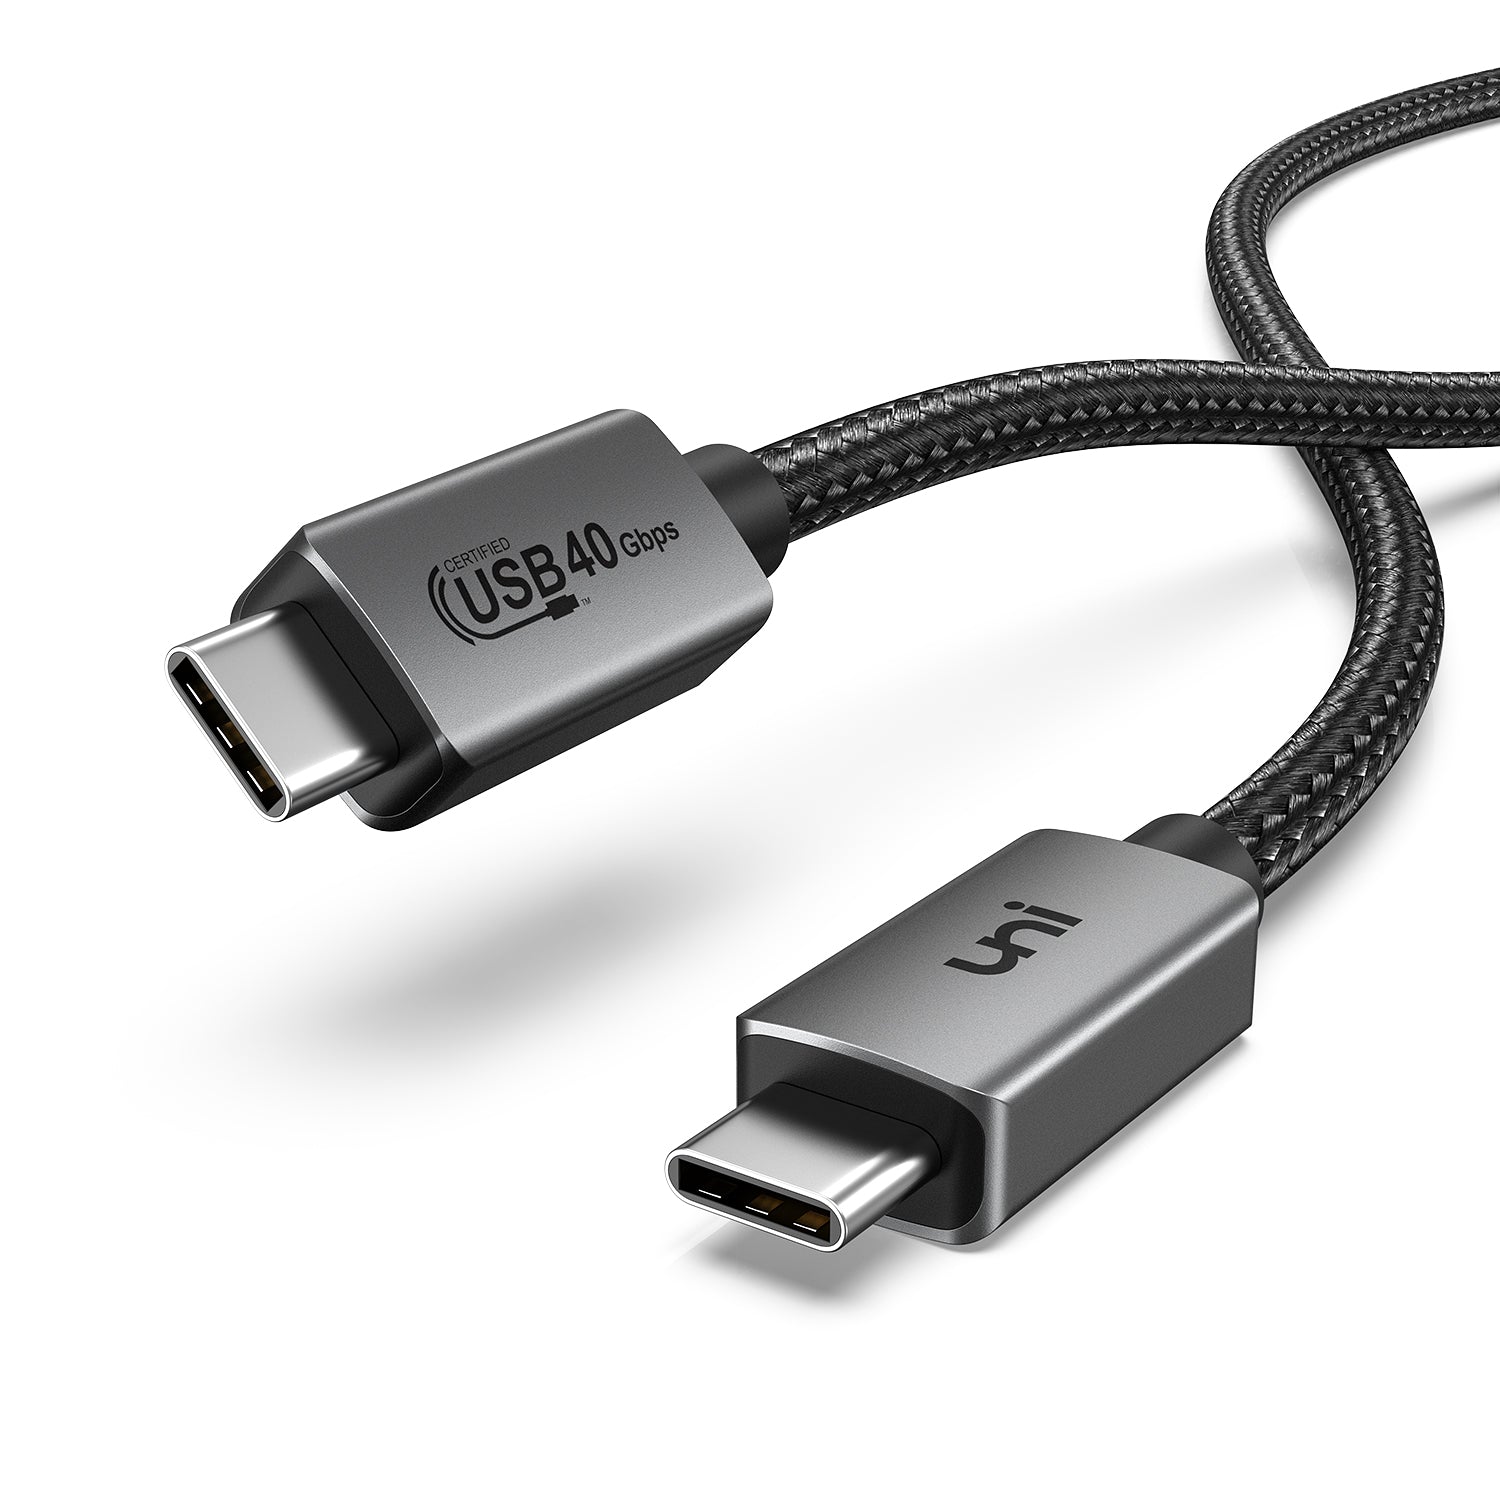 Mose twinkle fingeraftryk USB4 USB-C Cable, 100W USB-C Cable, 40Gb/s USB-C Cable, uni® USB-C Cable,  8K Video Output Cable